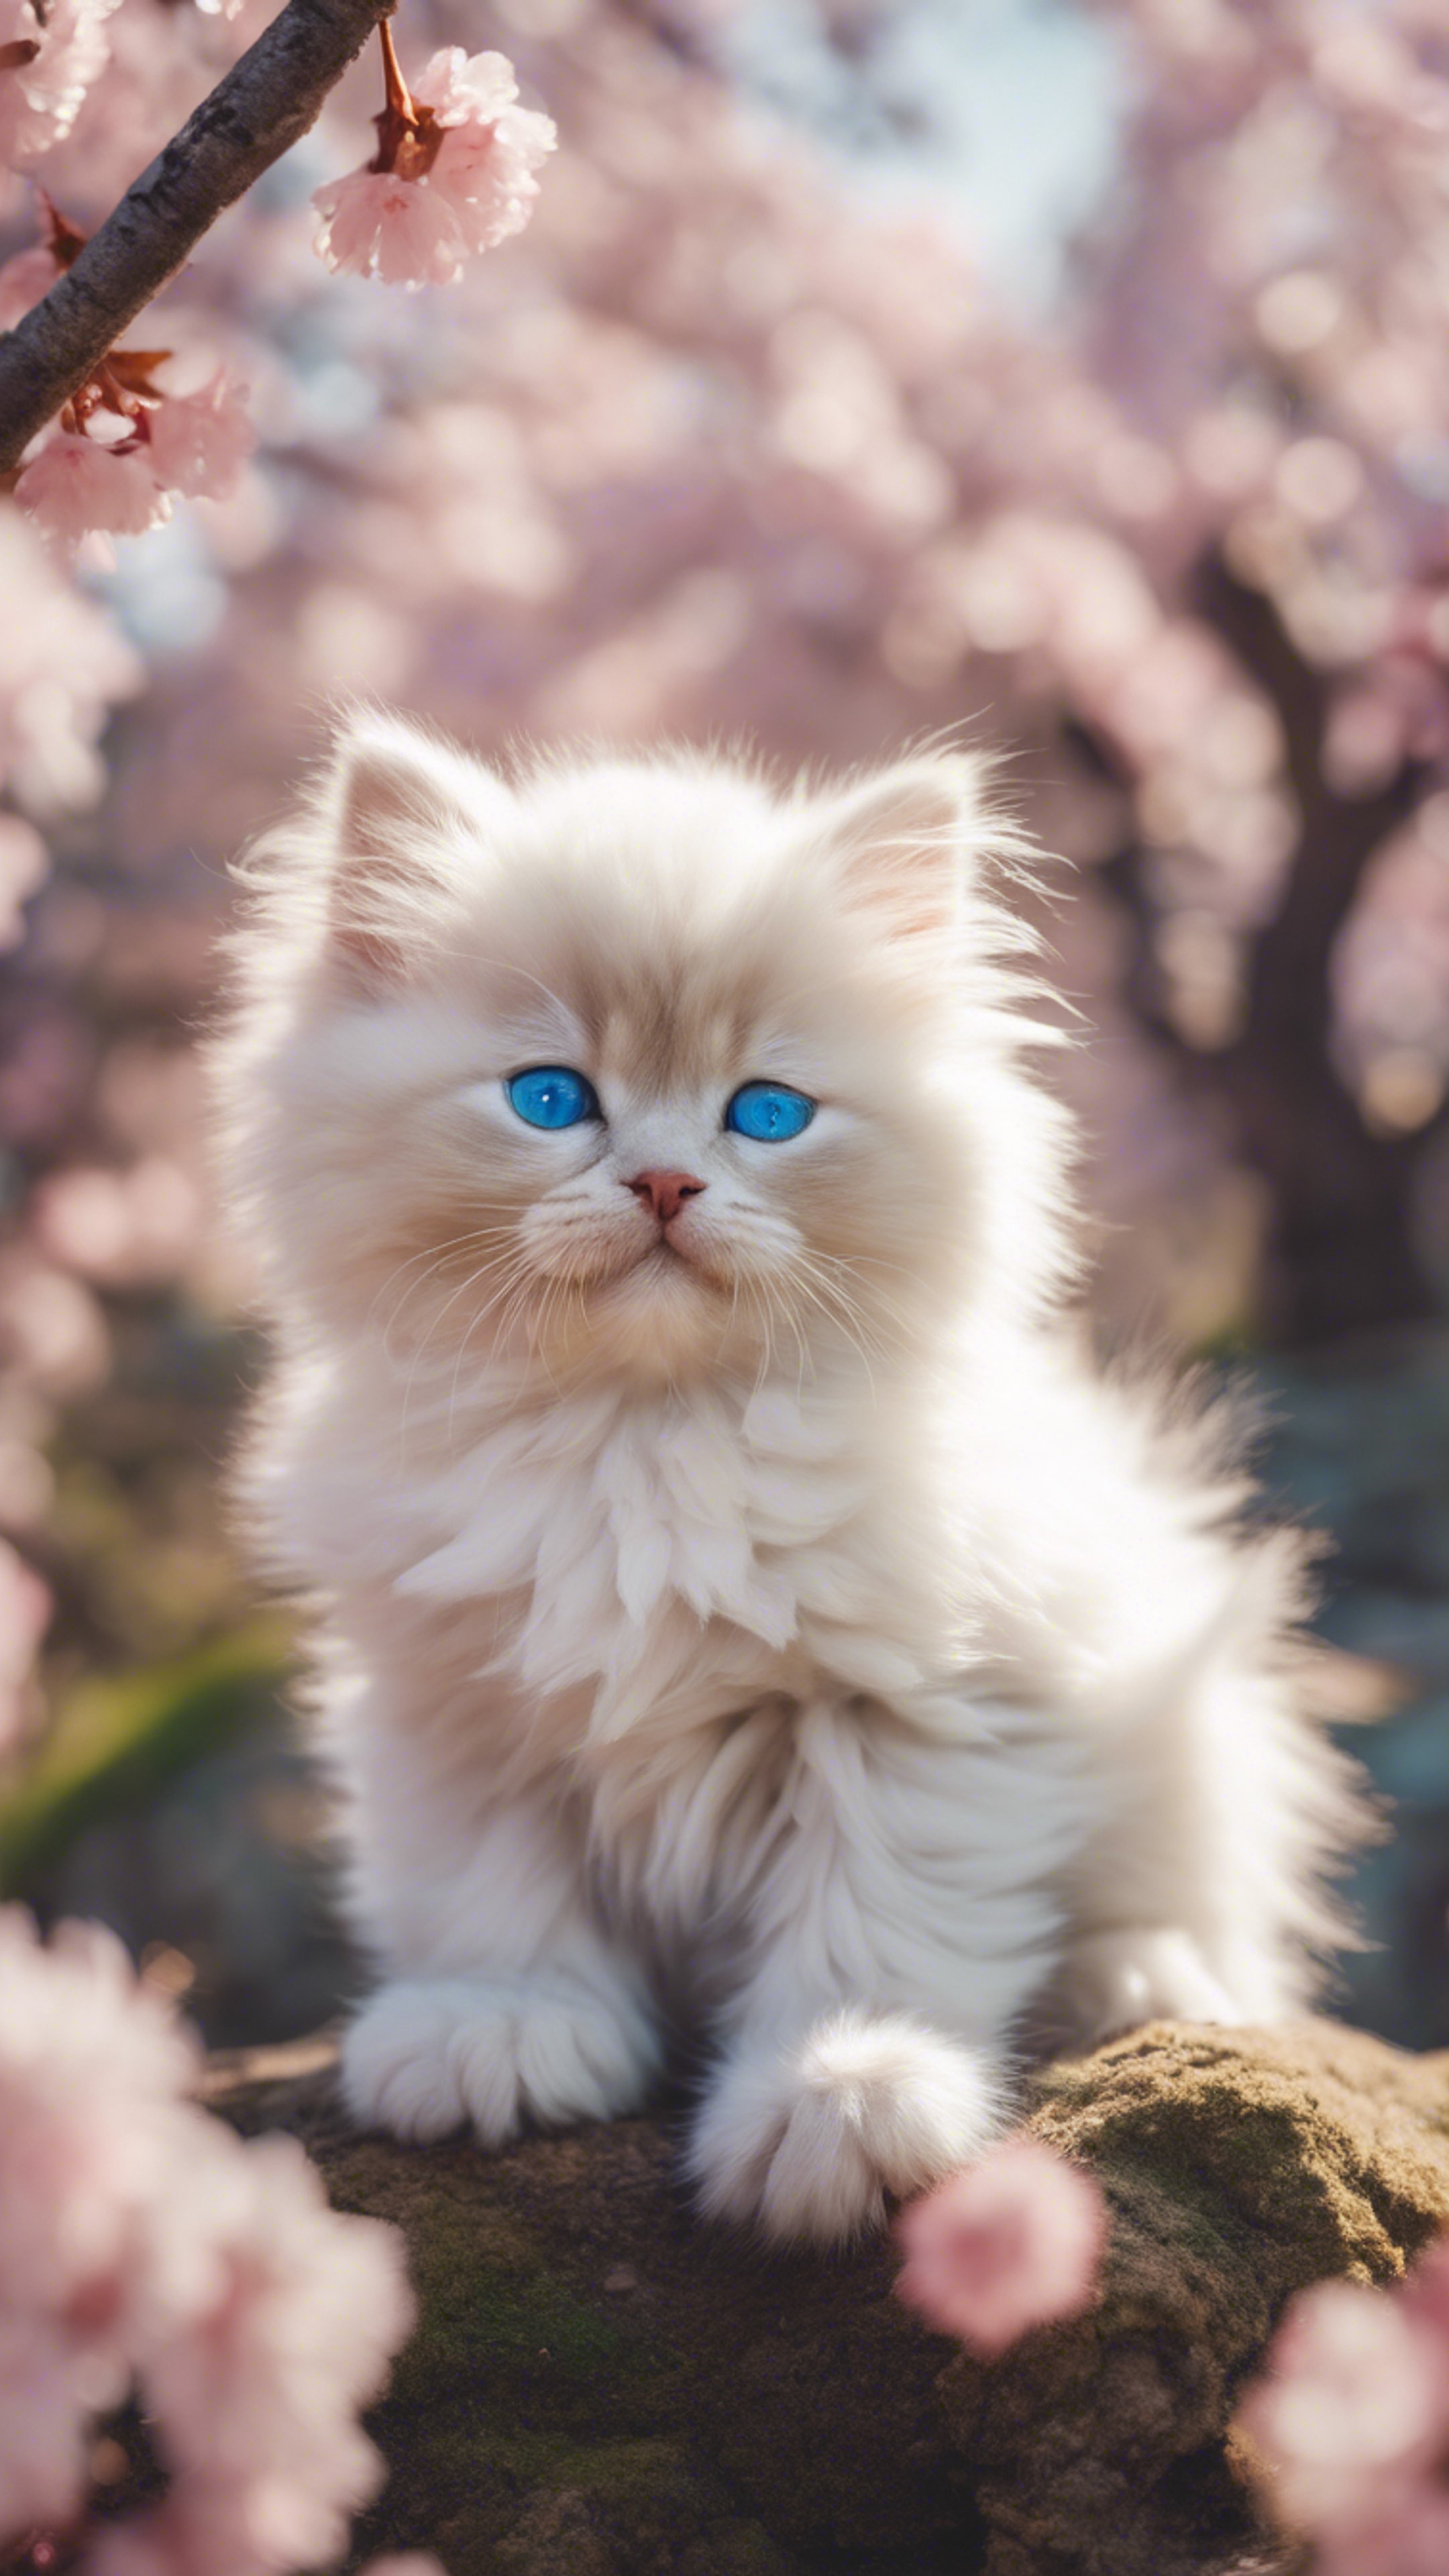 A fluffy Himalayan kitten with blue eyes, blissfully sleeping in a cherry blossom-filled Japanese garden in springtime. Sfondo[7574b48ca53a4fd7b91a]